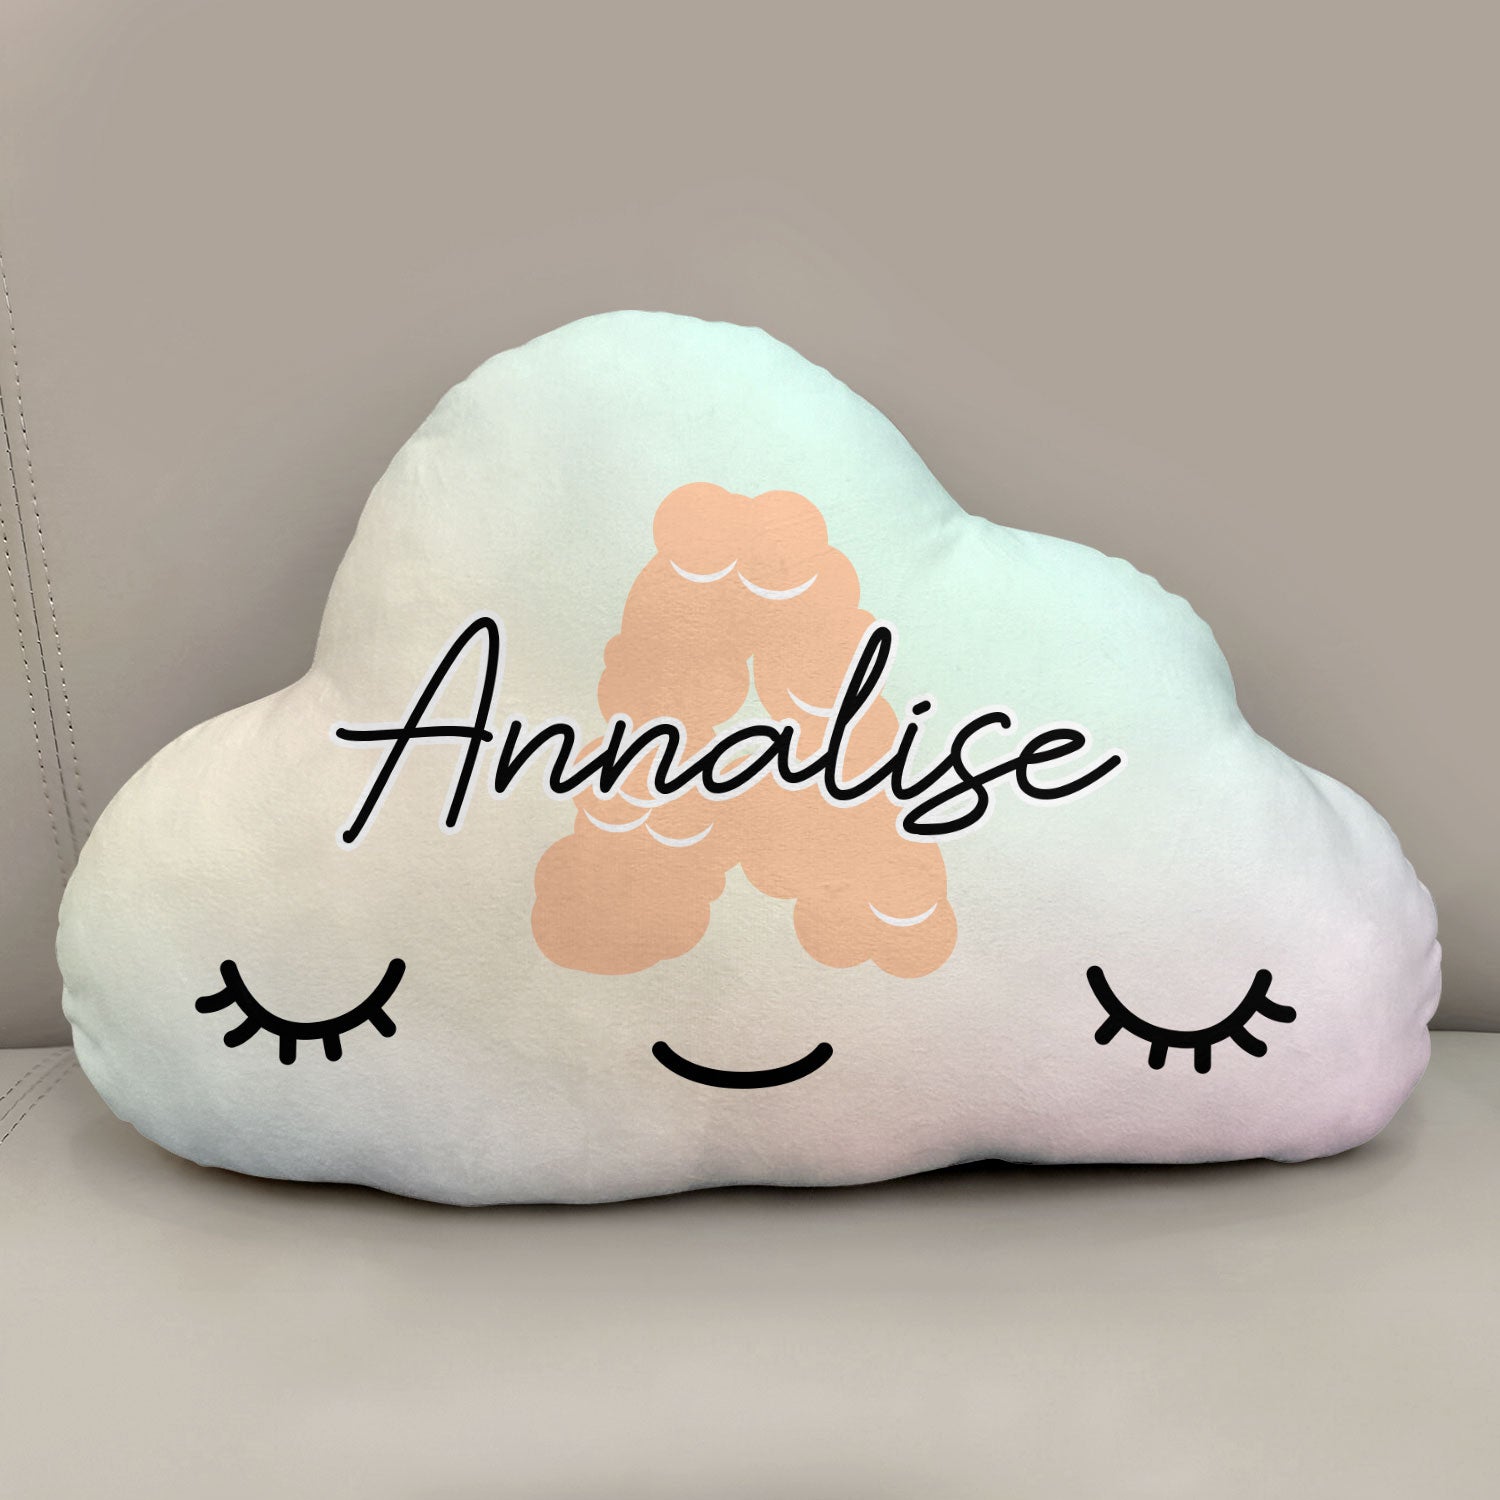 Baby Cute Monogram - Lovely Gift For Girl, Newborn, Kid, First Birthday Gift - Personalized Cloud Shaped Pillow